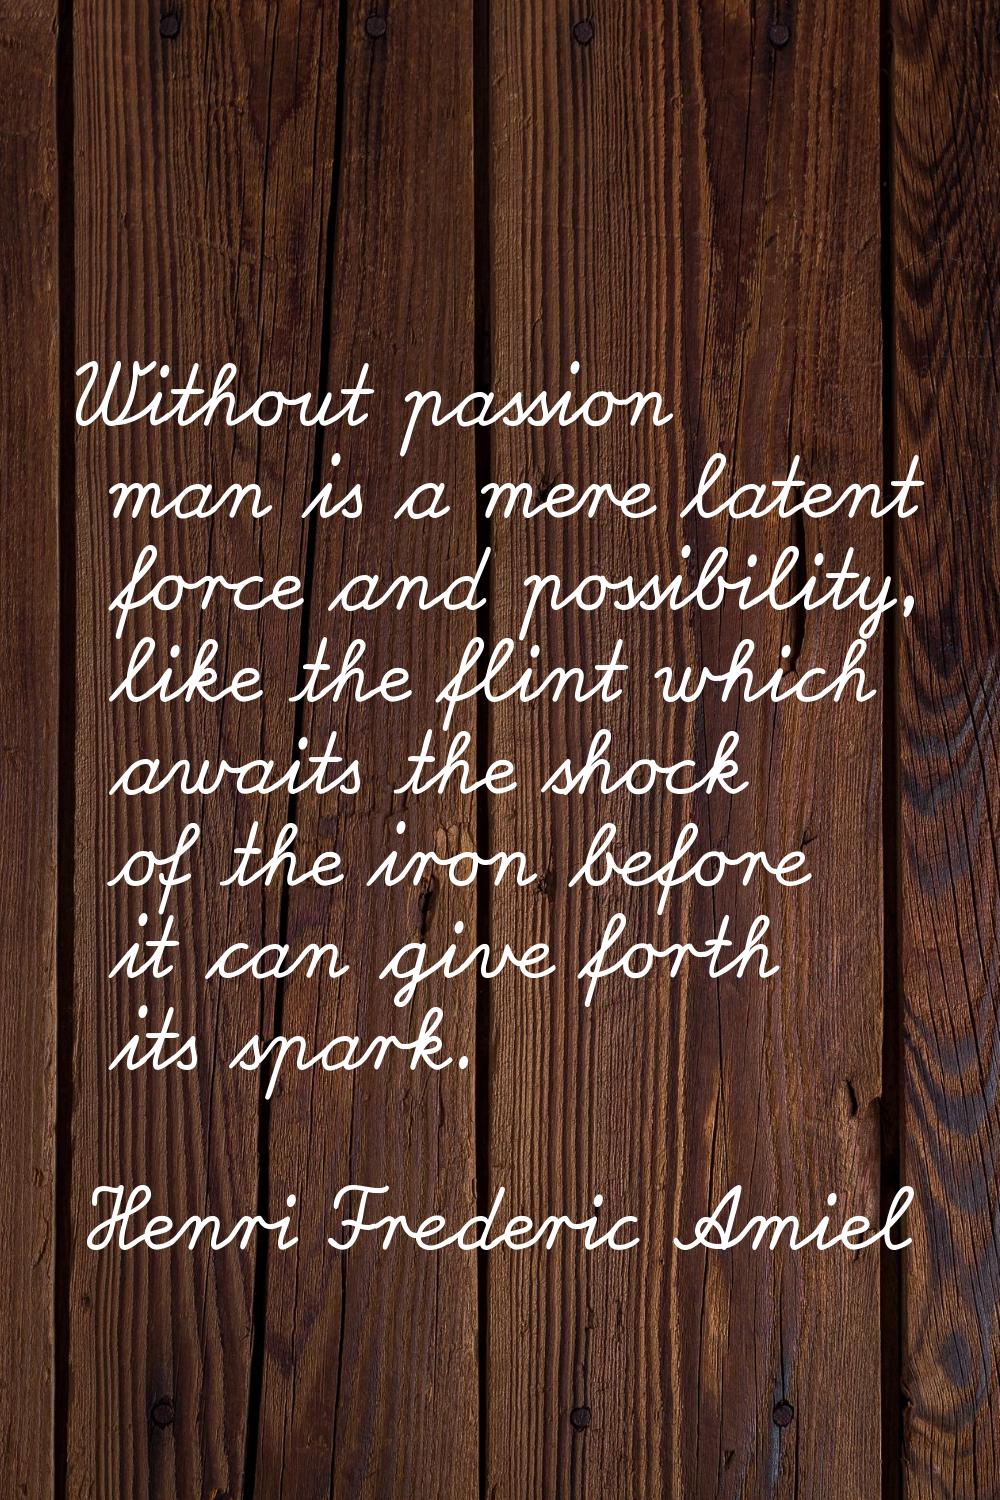 Without passion man is a mere latent force and possibility, like the flint which awaits the shock o